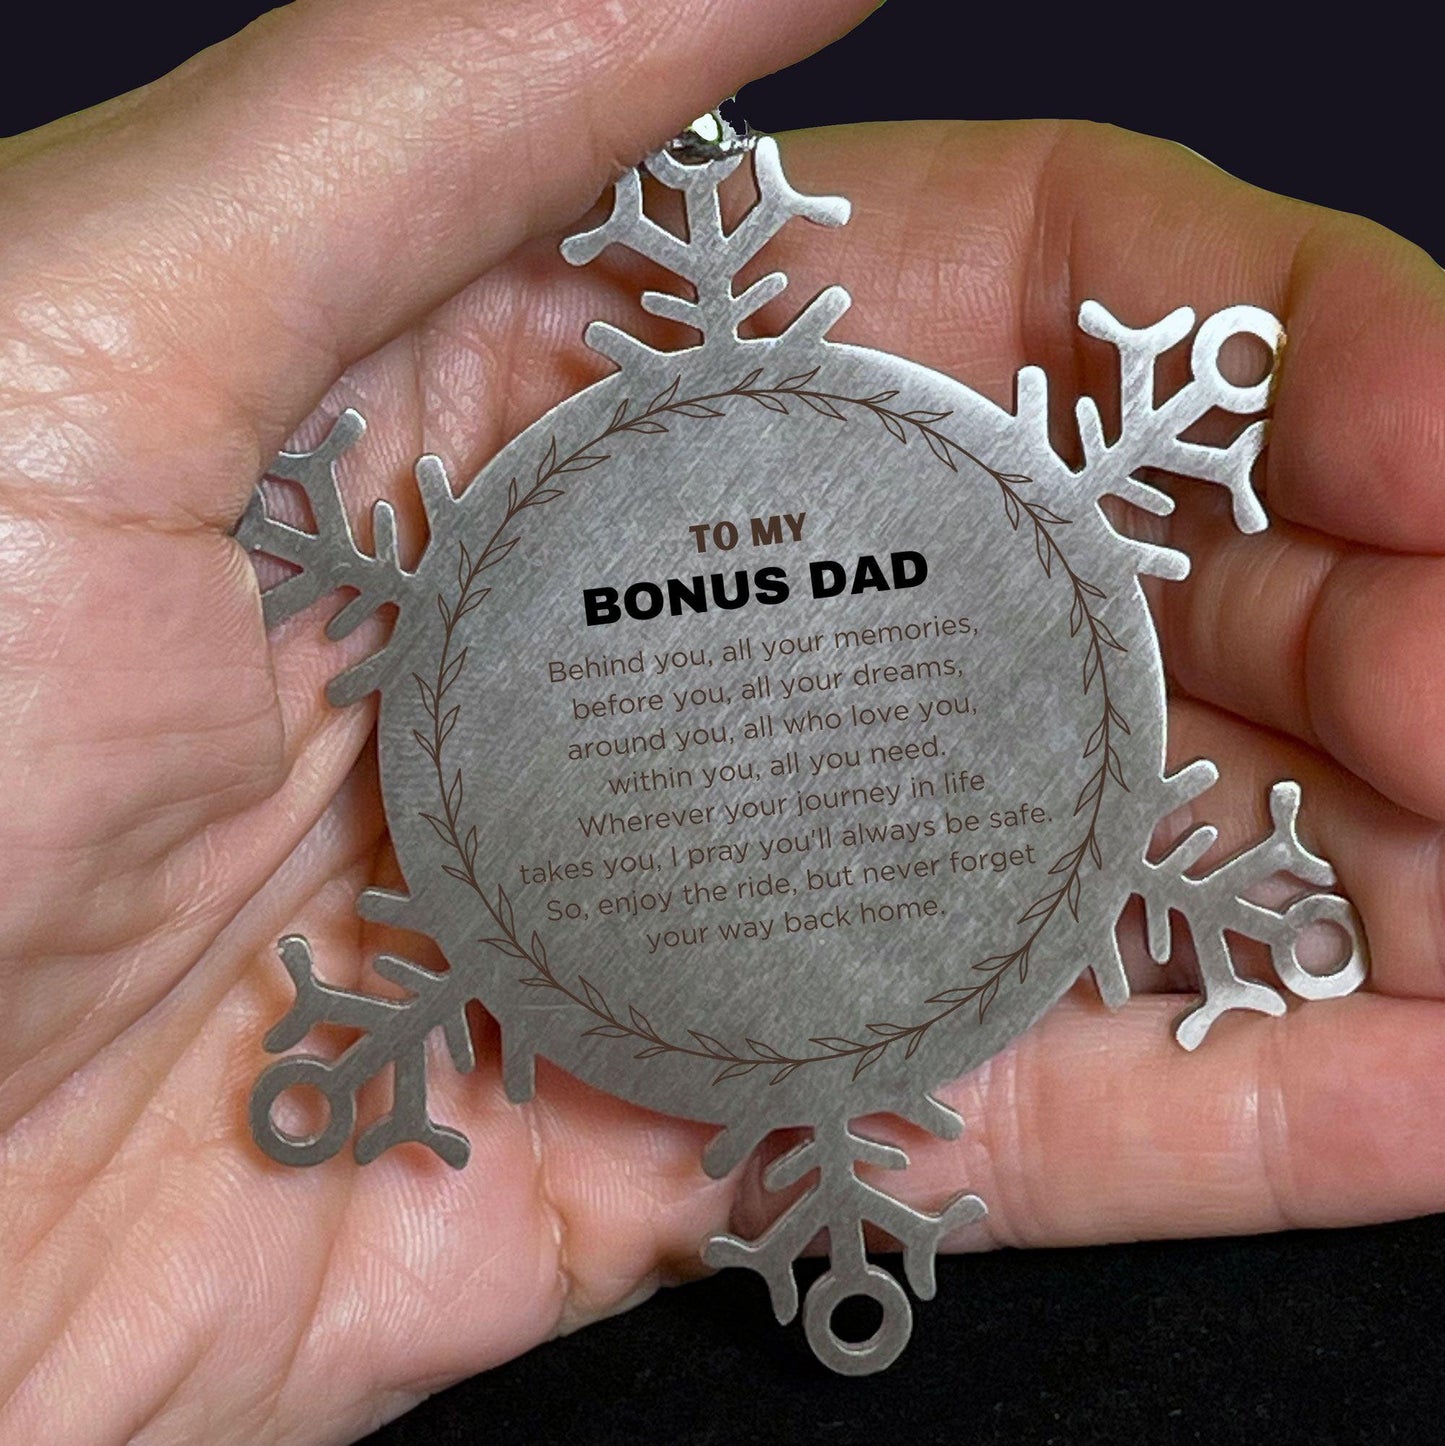 Inspirational Bonus Dad Snowflake Engraved Ornament - Behind you, all your Memories, Before you, all your Dreams - Birthday, Christmas Holiday Gifts - Mallard Moon Gift Shop